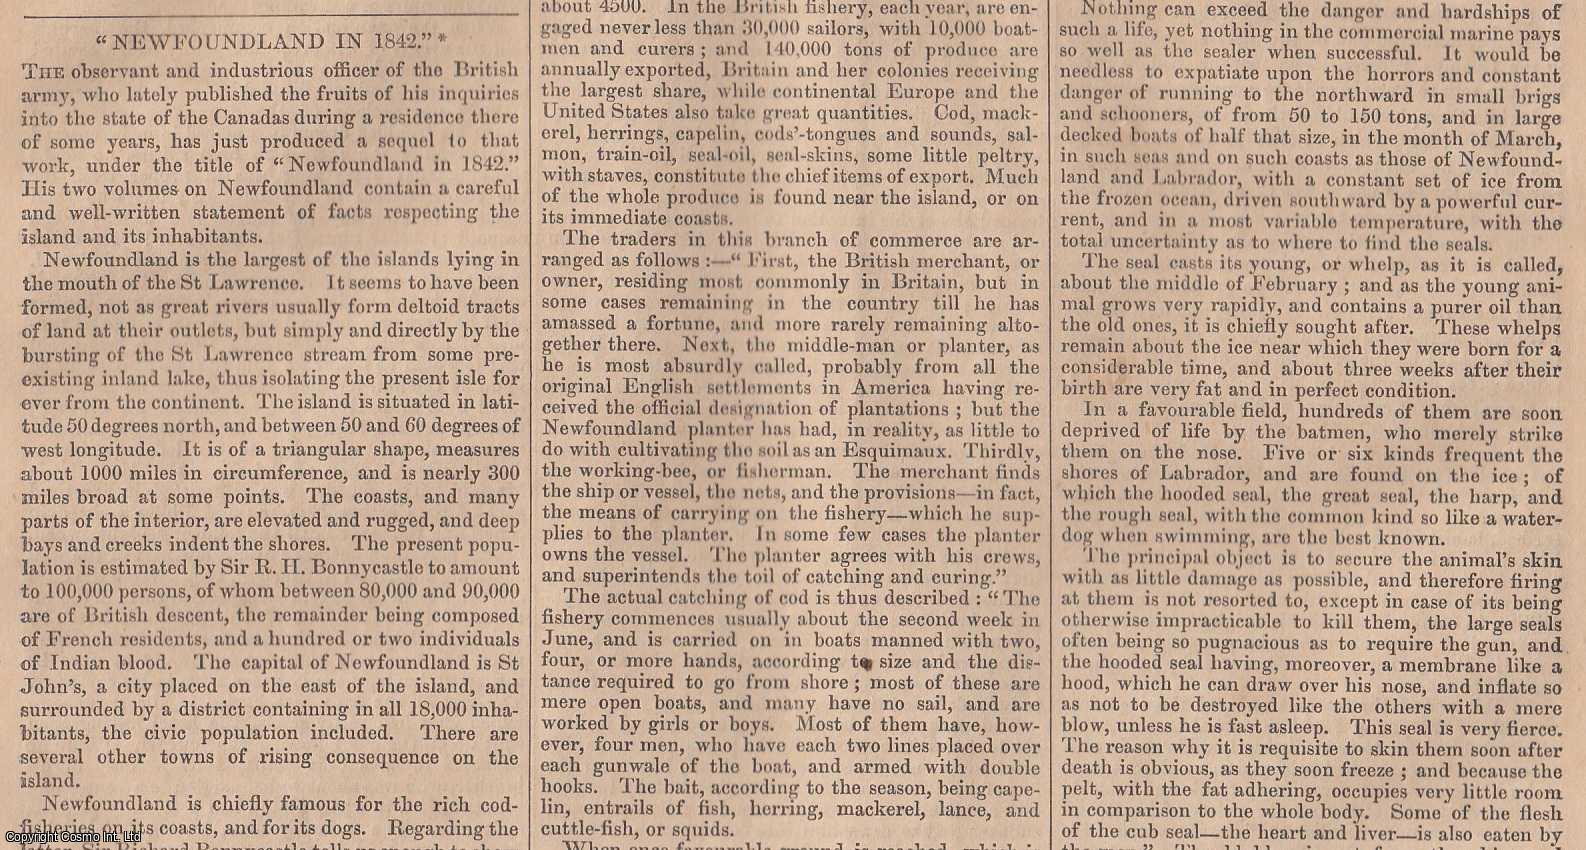 CANADA - Newfoundland in 1842. FEATURED in Chambers' Edinburgh Journal. A single article, extracted from an issue of the Chambers' Edinburgh Journal.